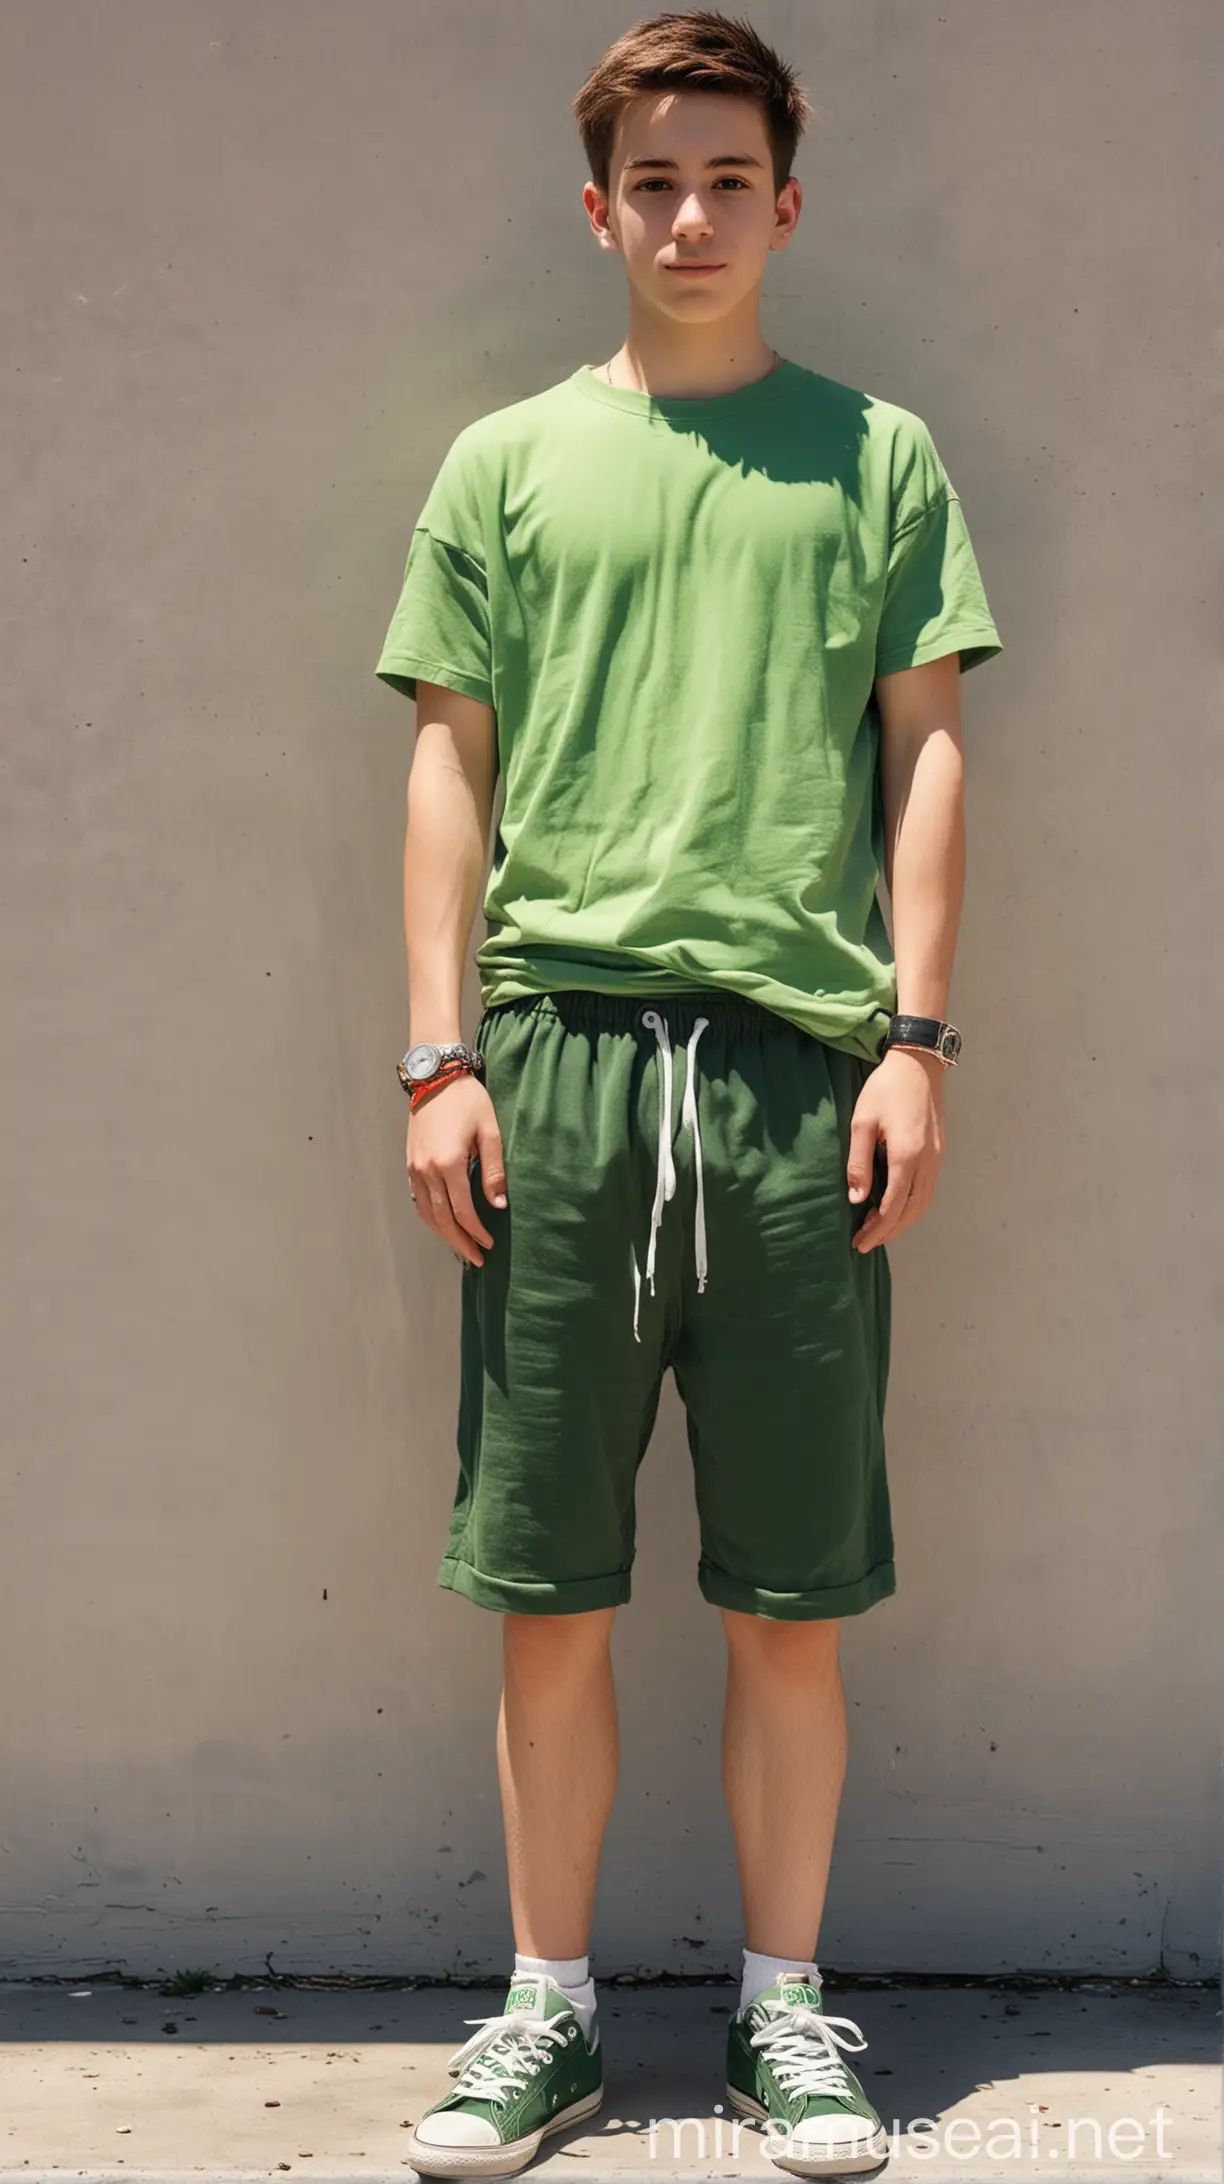 Youthful Character in Green TShirt and Shorts with Sneakers